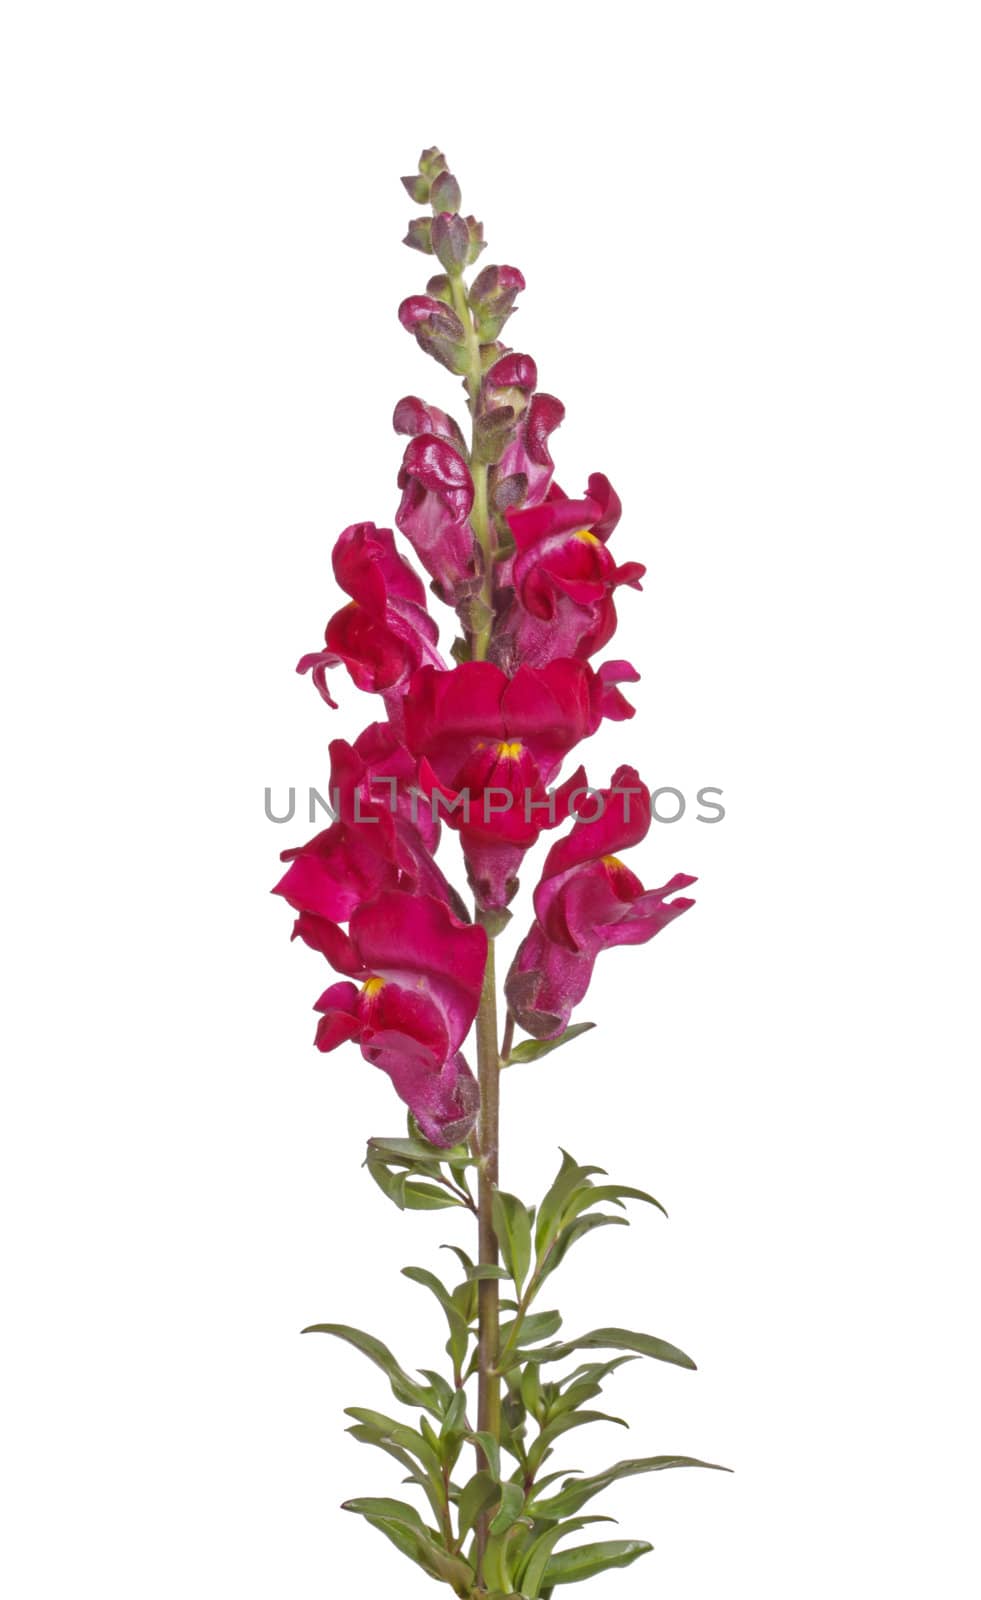 Single stem with red flowers of snapdragon (Antirrhinum majus) isolated against a white background